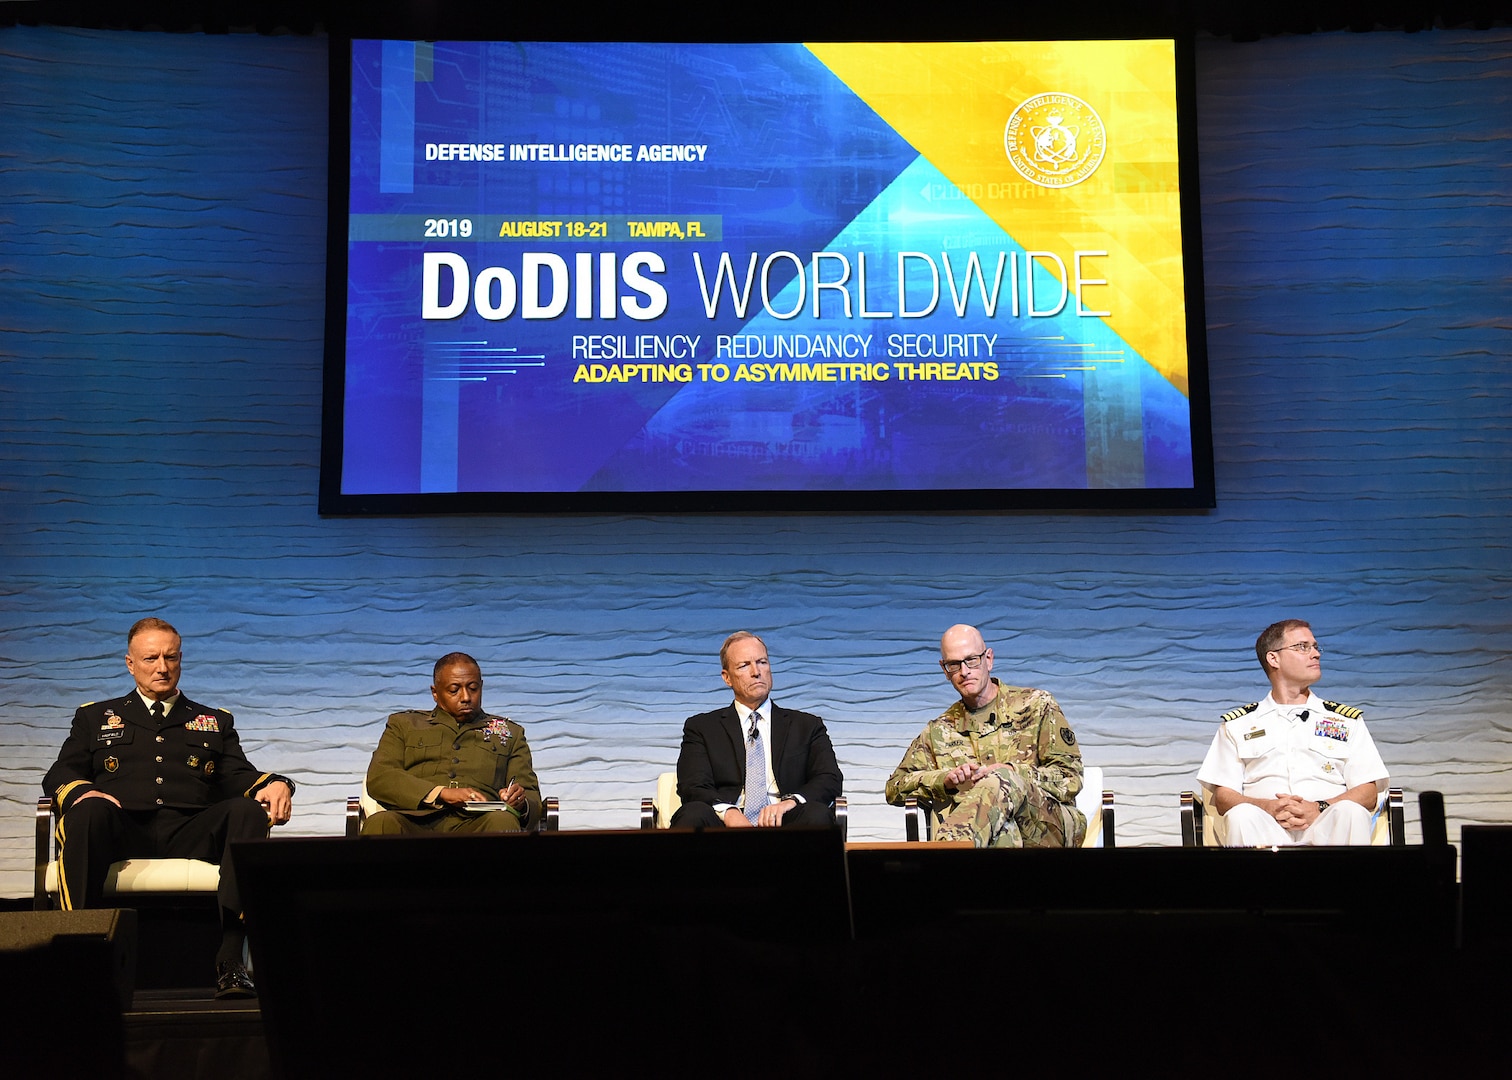 Directors of intelligence from five U.S. military organizations participate in a panel discussion on how artificial intelligence, modernization and information sharing impact military readiness